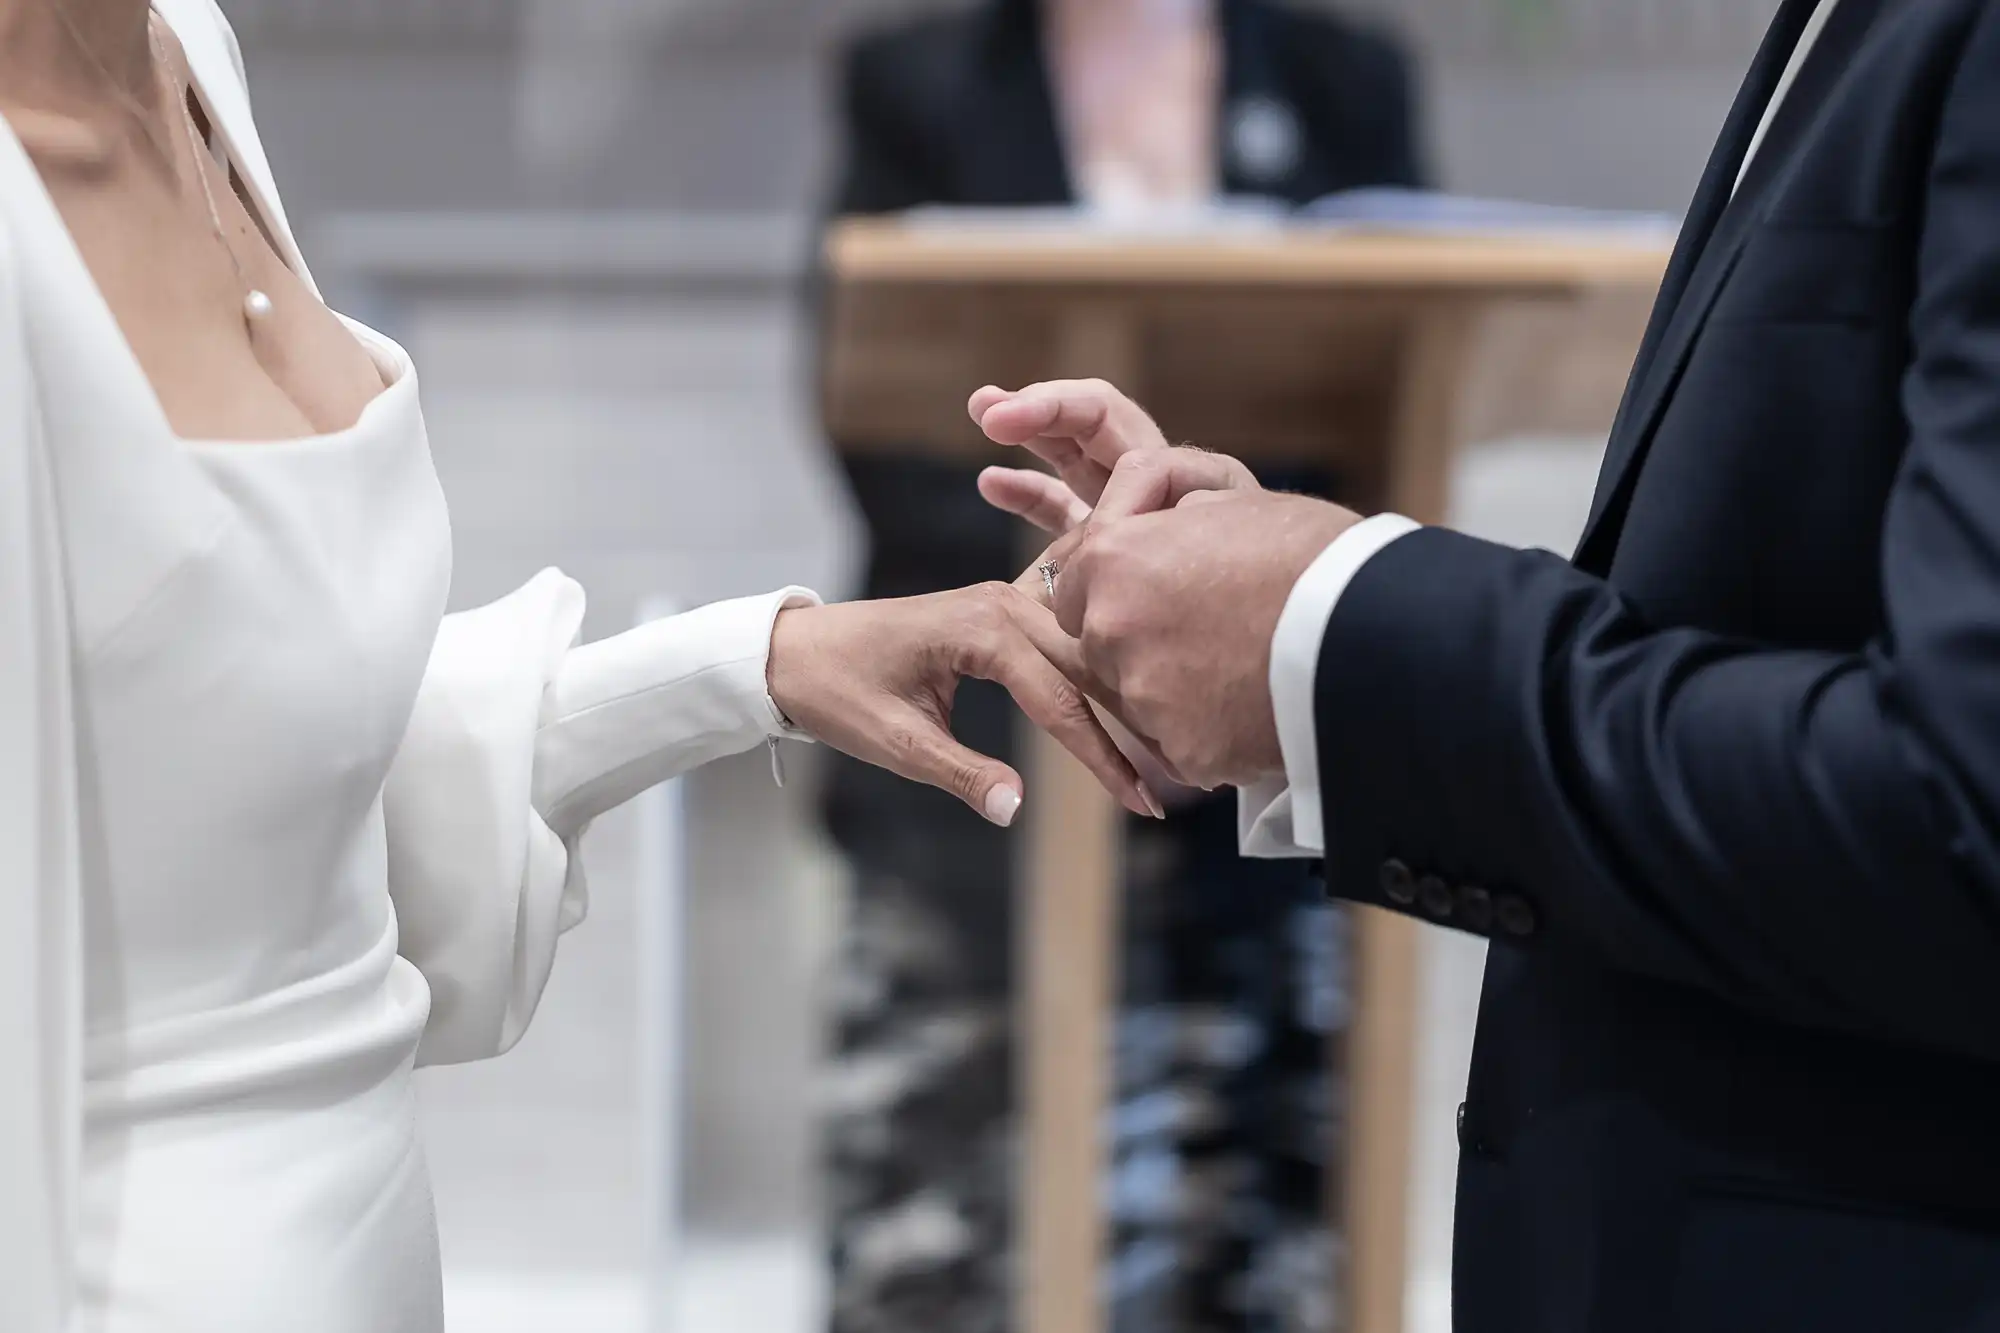 A bride and groom exchanging rings during their wedding ceremony, with an officiant visible in the background.